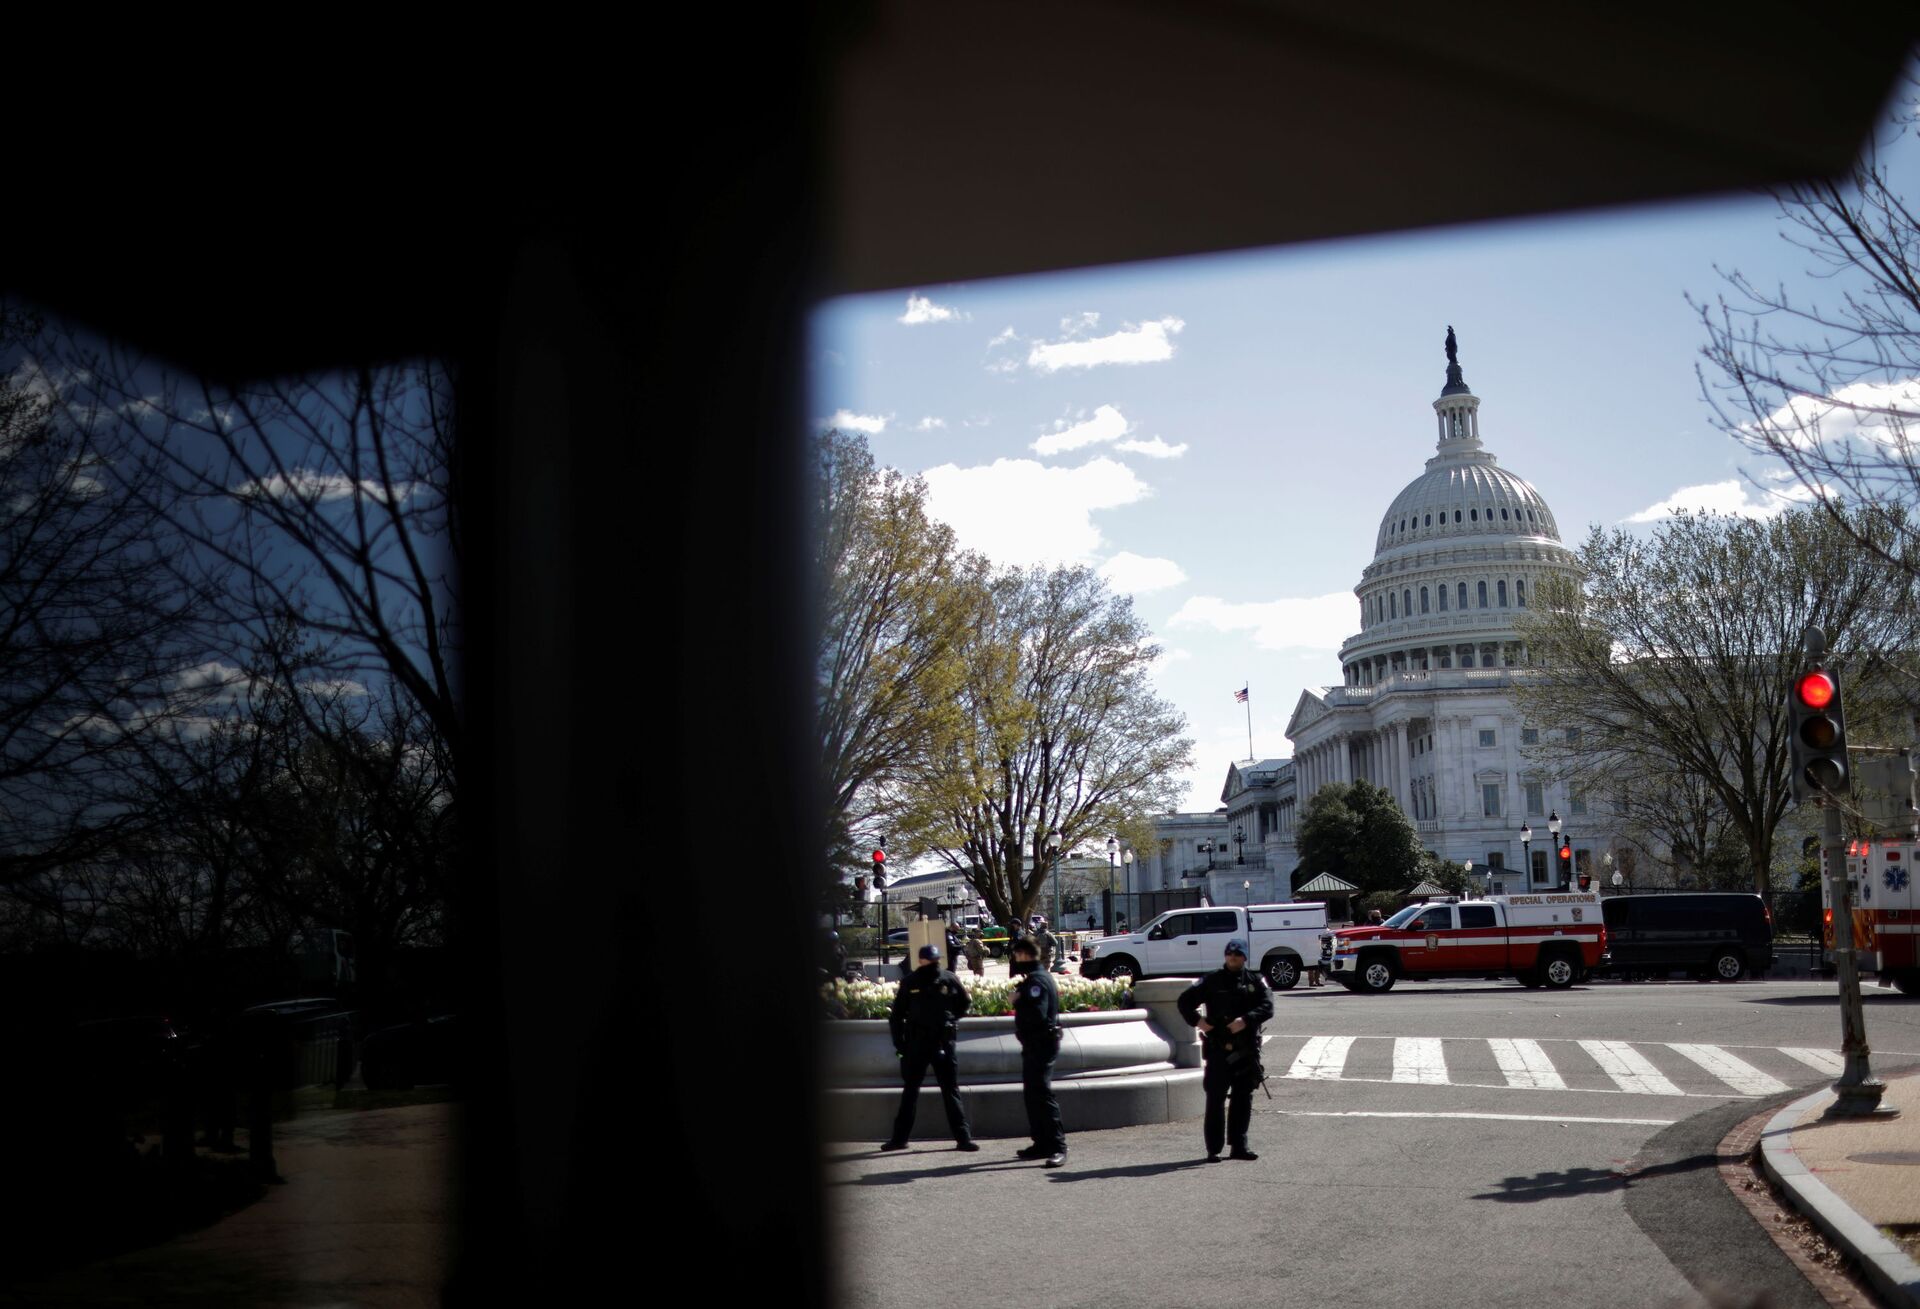 Capitol Police Union Urges Congress to Boost Security as Department Risks Thinning Ranks - Report - Sputnik International, 1920, 05.04.2021